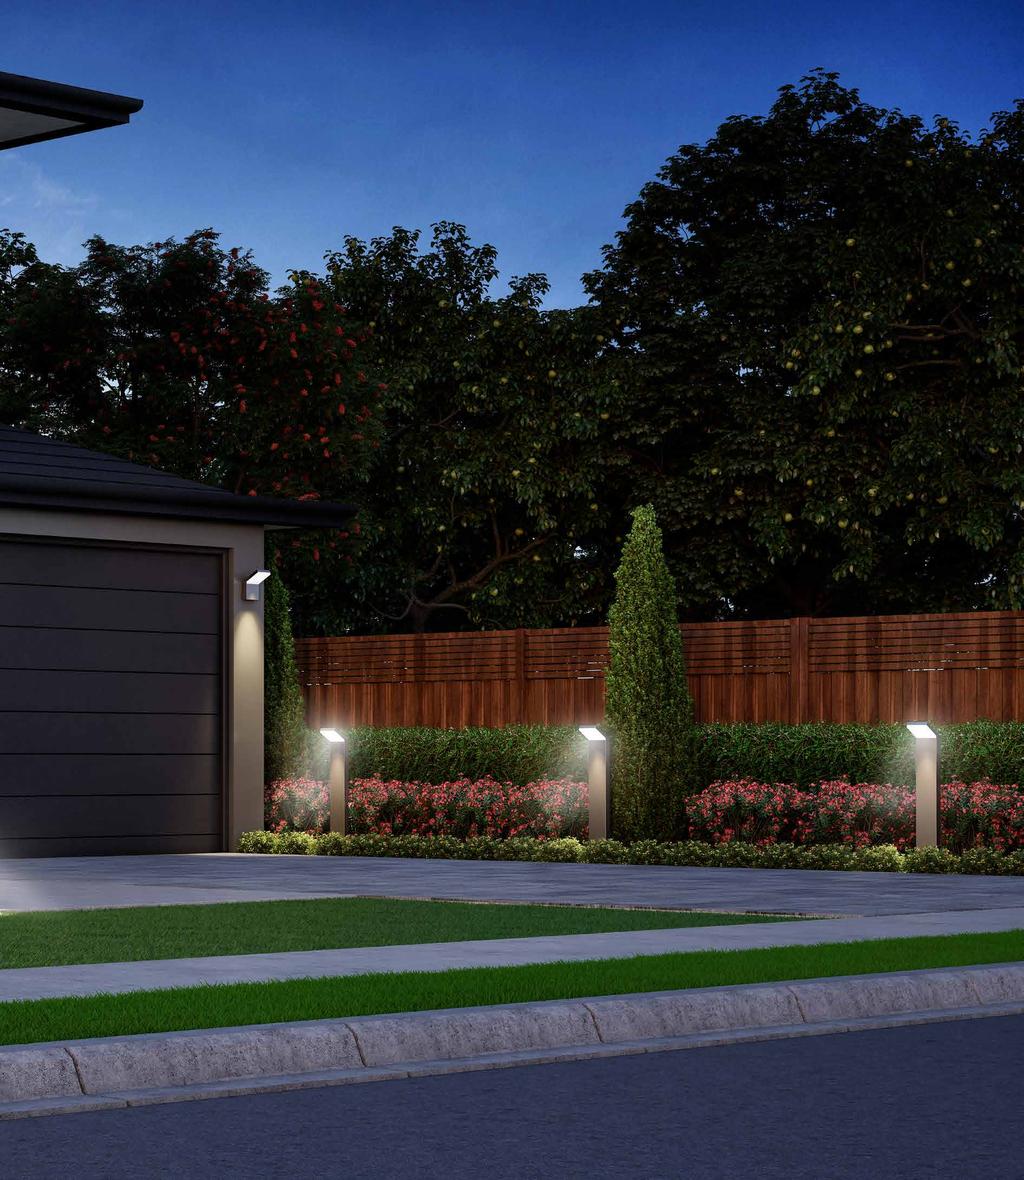 Transform and define your outdoor space with FrameWRX exterior lighting. Highlight architectural features or illuminate landscaped areas no matter the size or scale of installation.